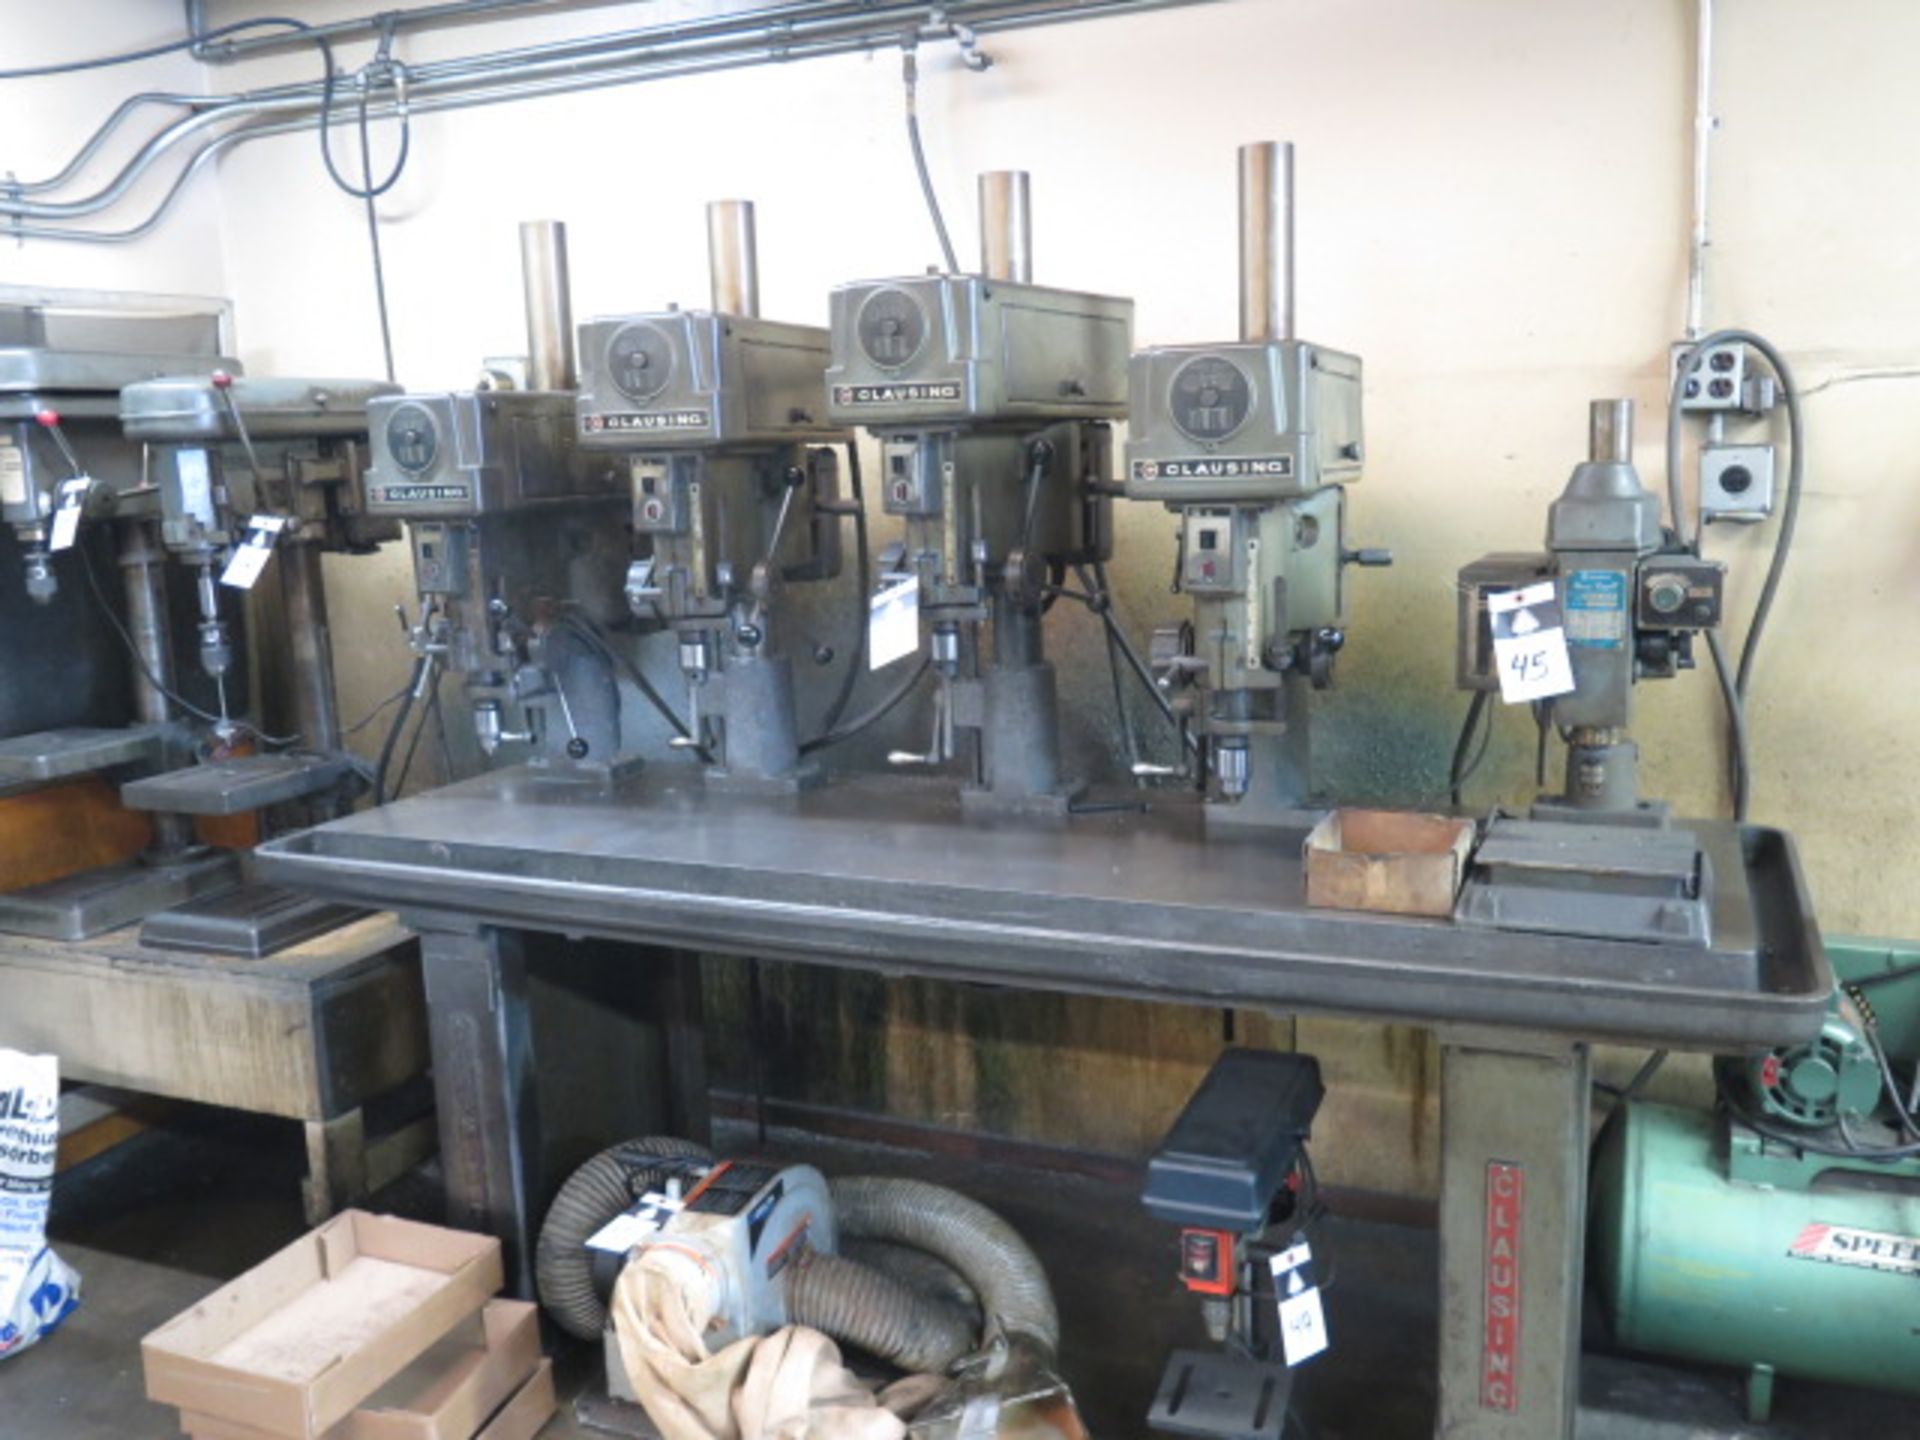 Clausing 4-Head Gang Drill Press w/ 5-Speed Heads, 24” x 80” Table (SOLD AS-IS - NO WARRANTY)